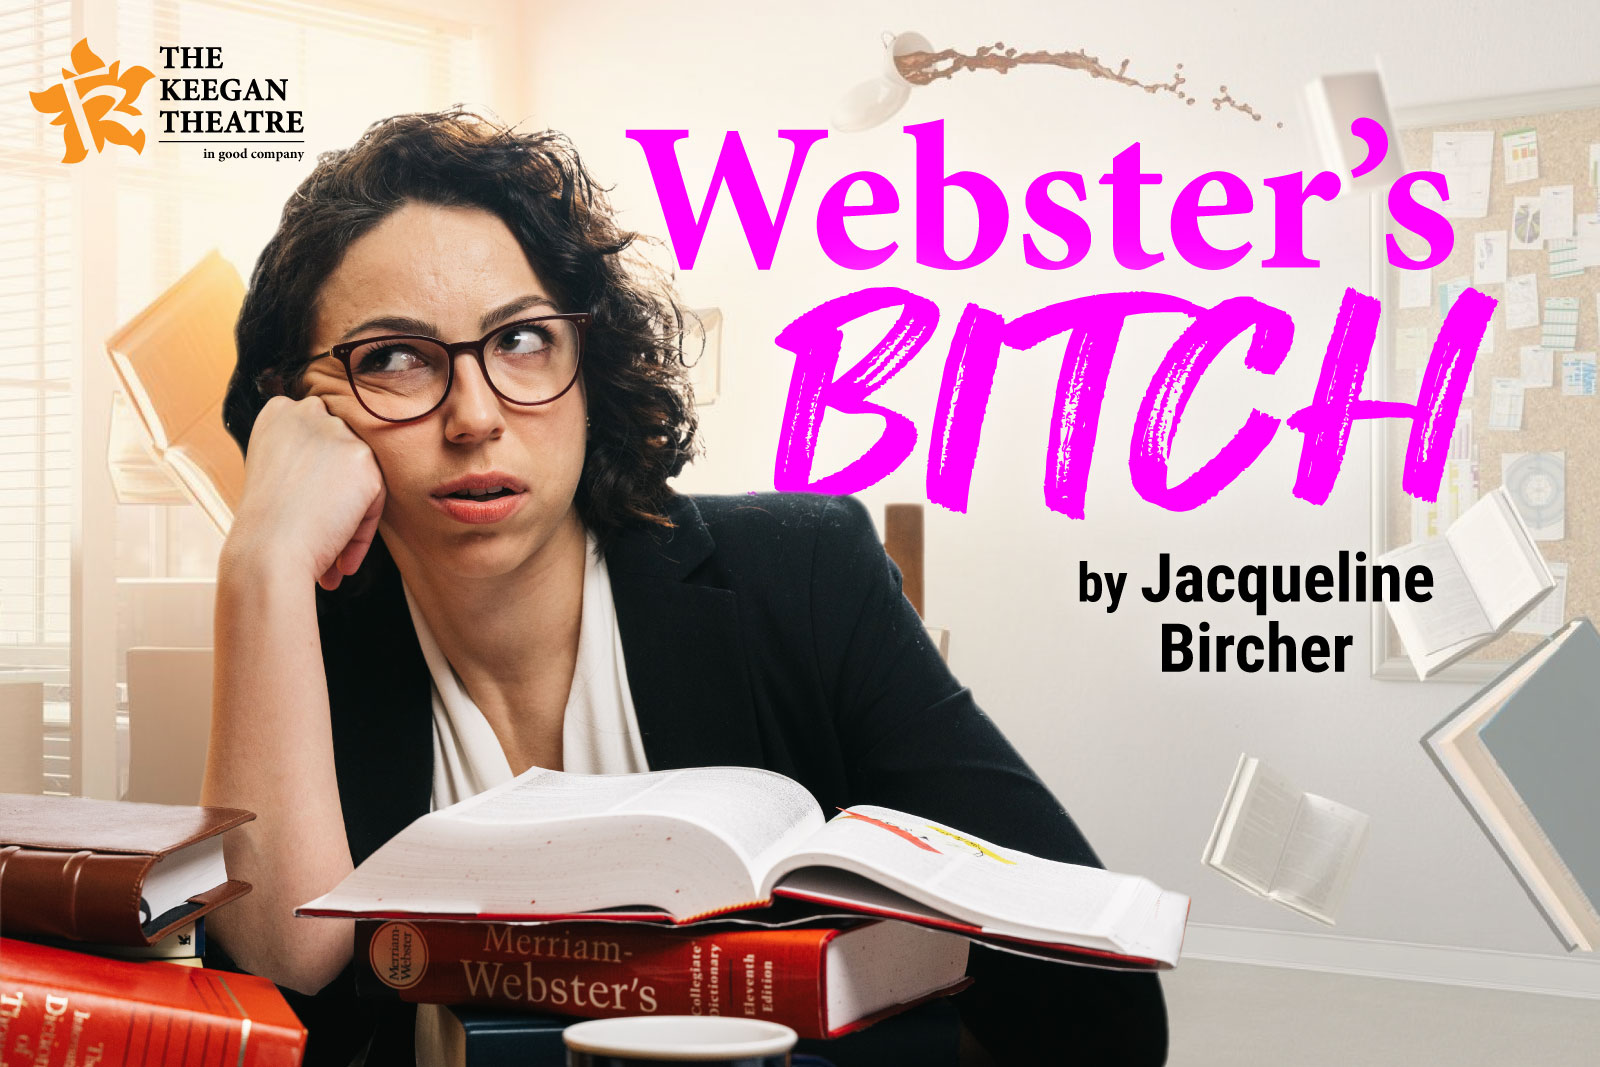 WEBSTER’S BITCH at The Keegan Theatre